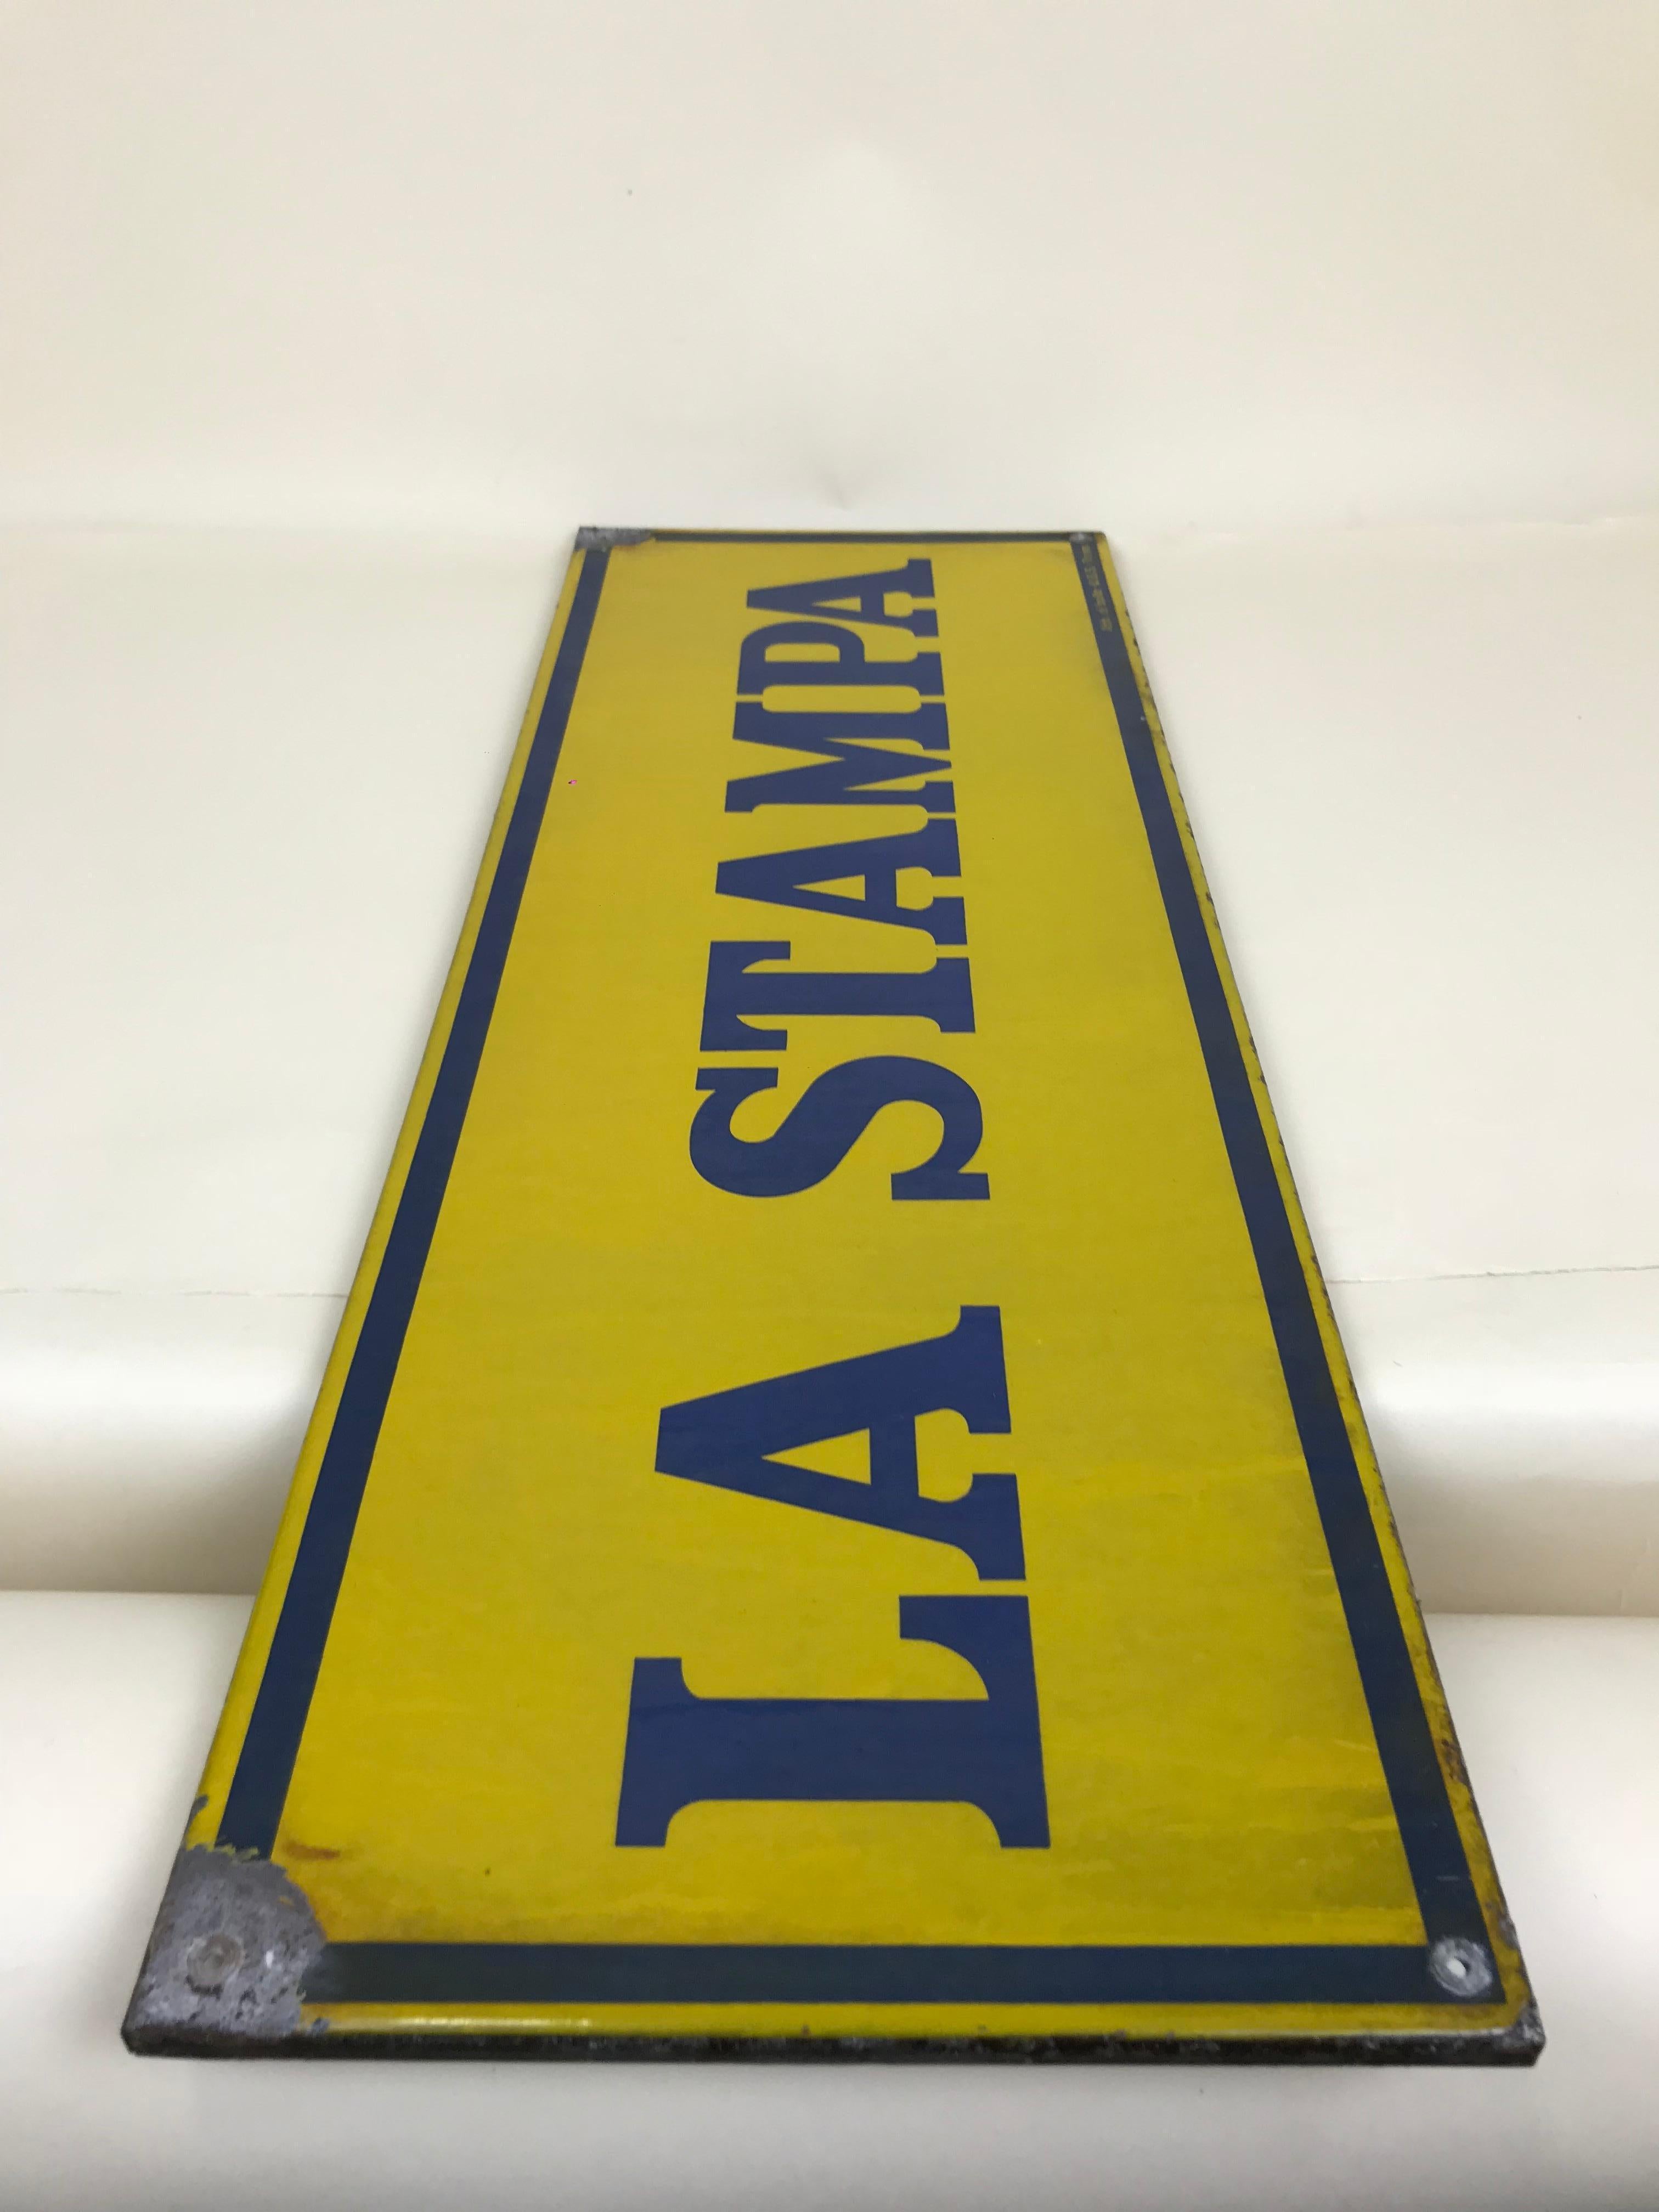 1950s Italian Vintage Enamel Blue and Yellow La Stampa Sign 2